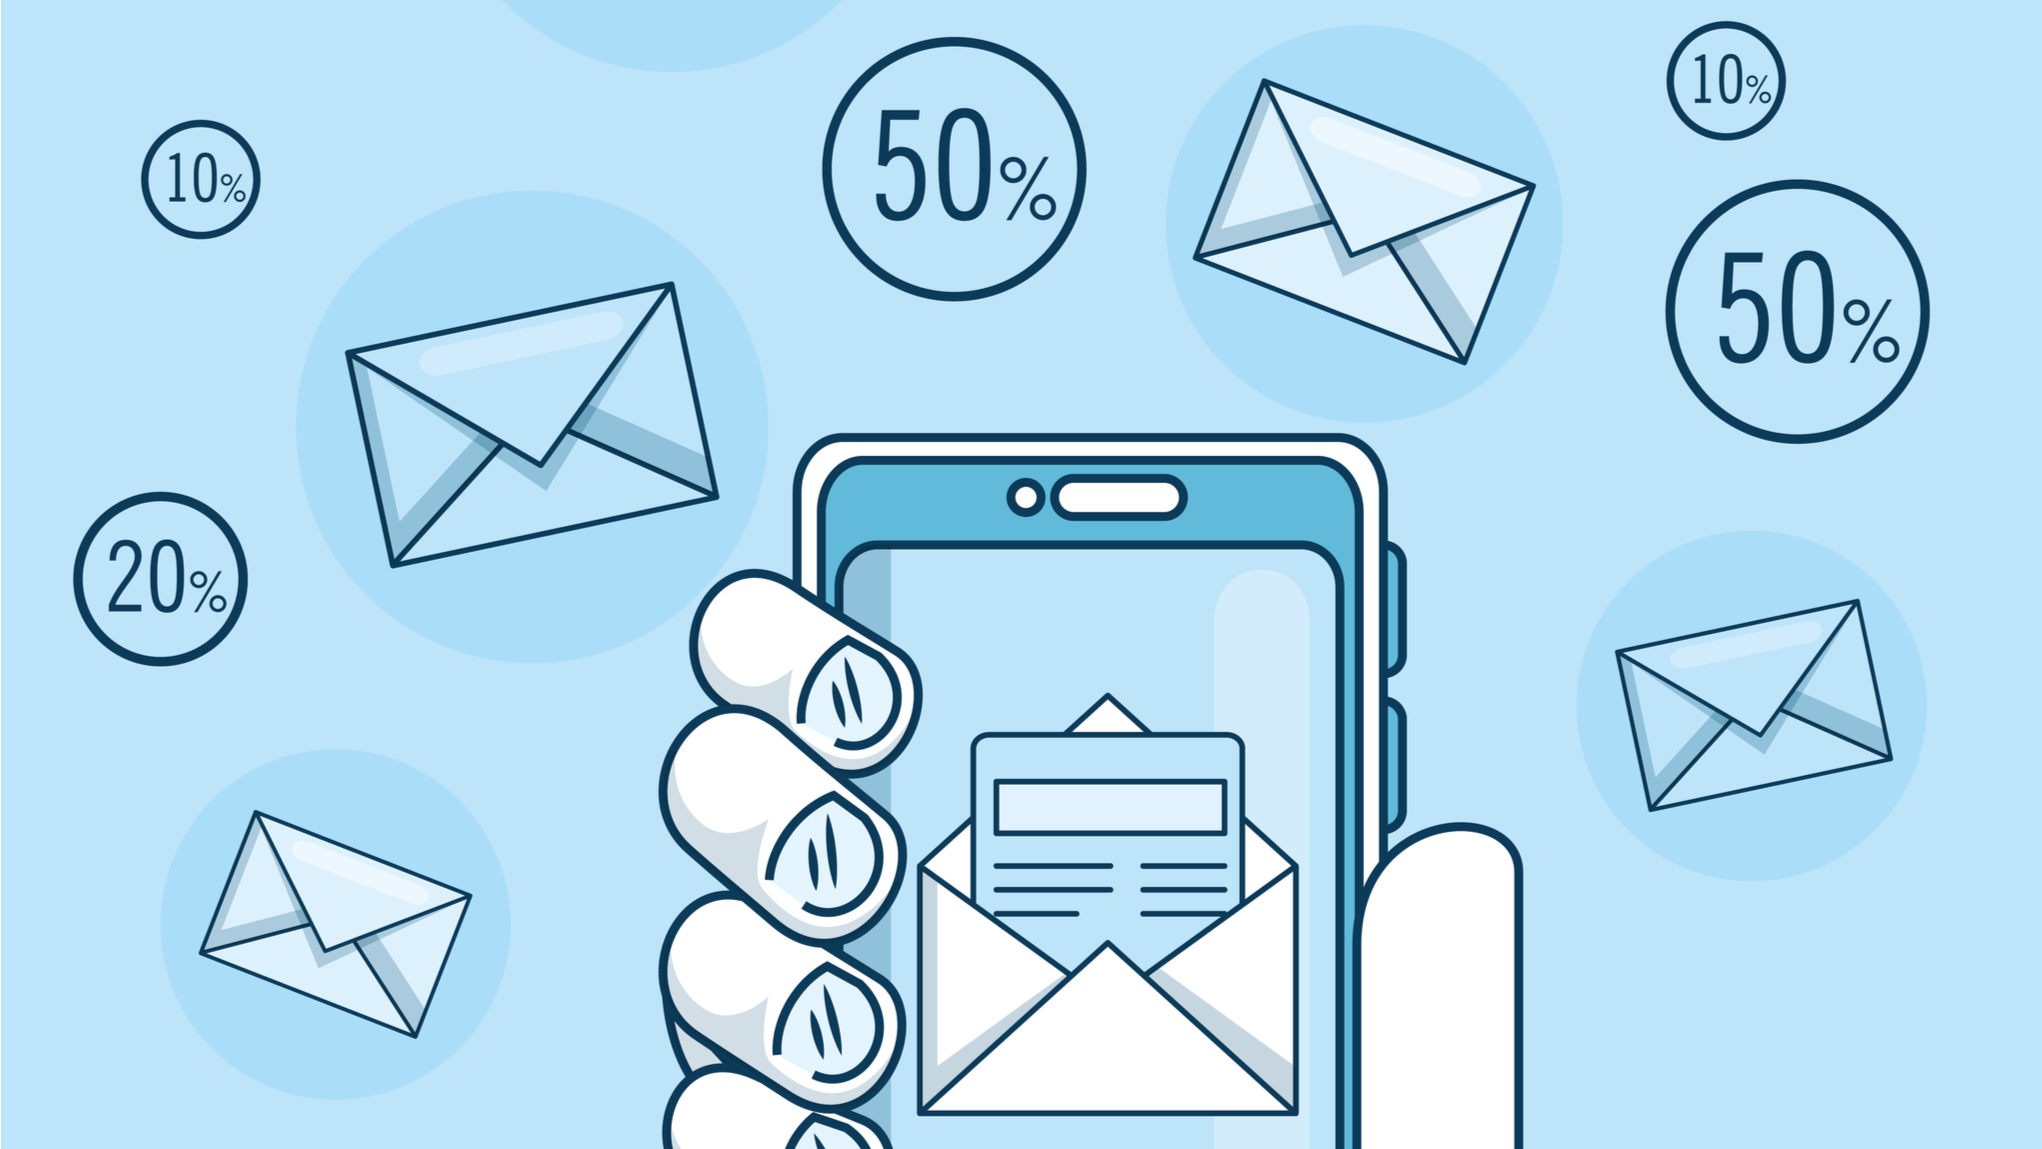 SMS Marketing: Basics, Benefits, and Best Practices